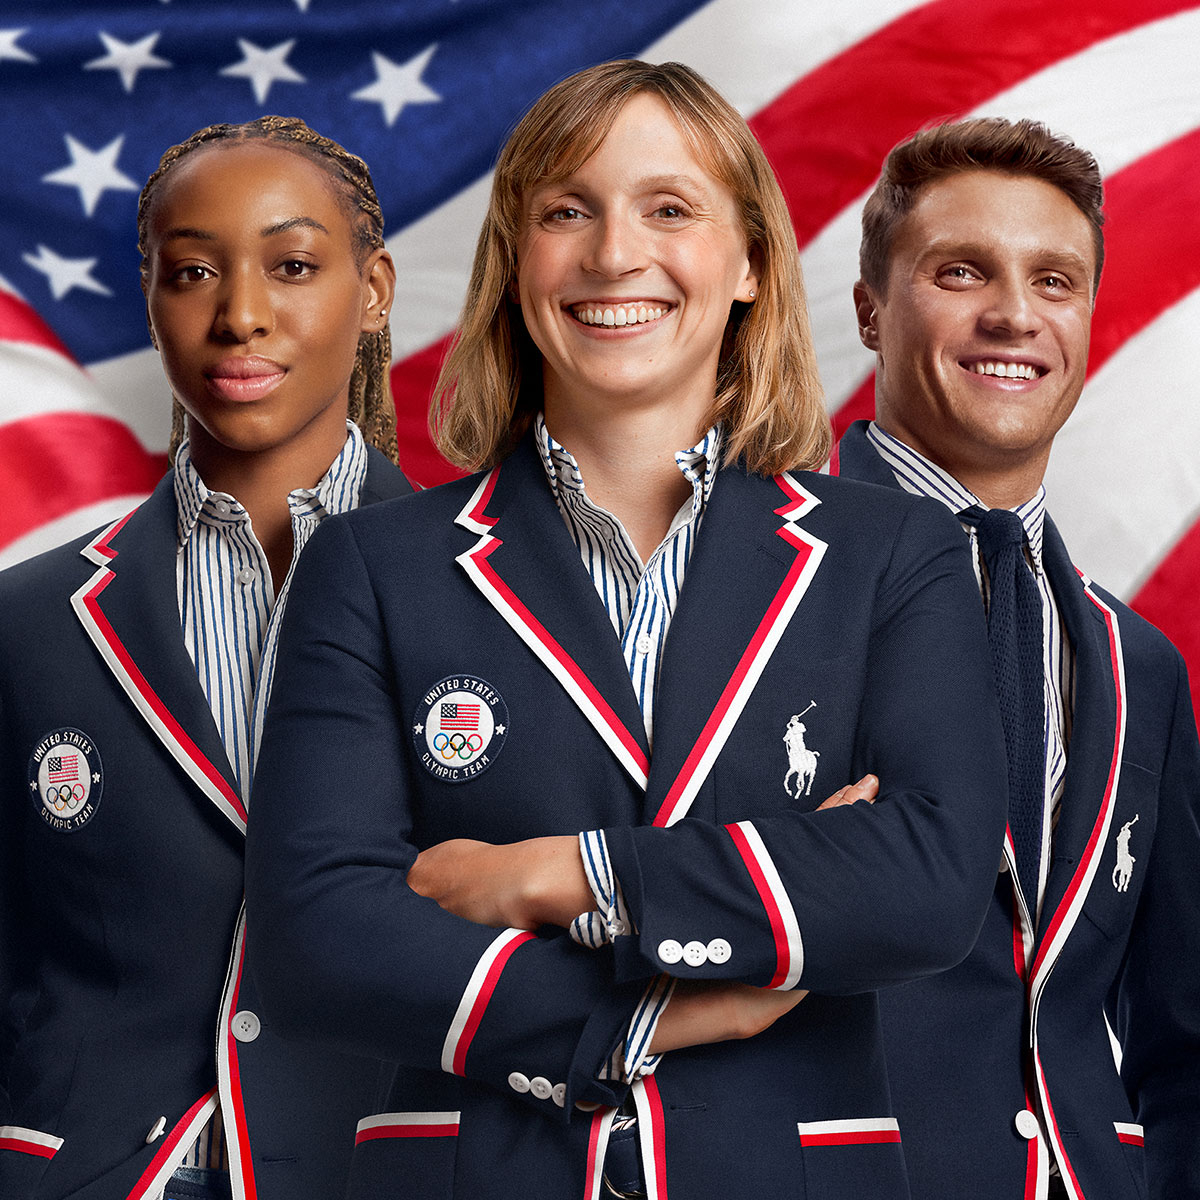 Team USA’s Uniforms for the 2024 Olympics Deserve a Gold Medal